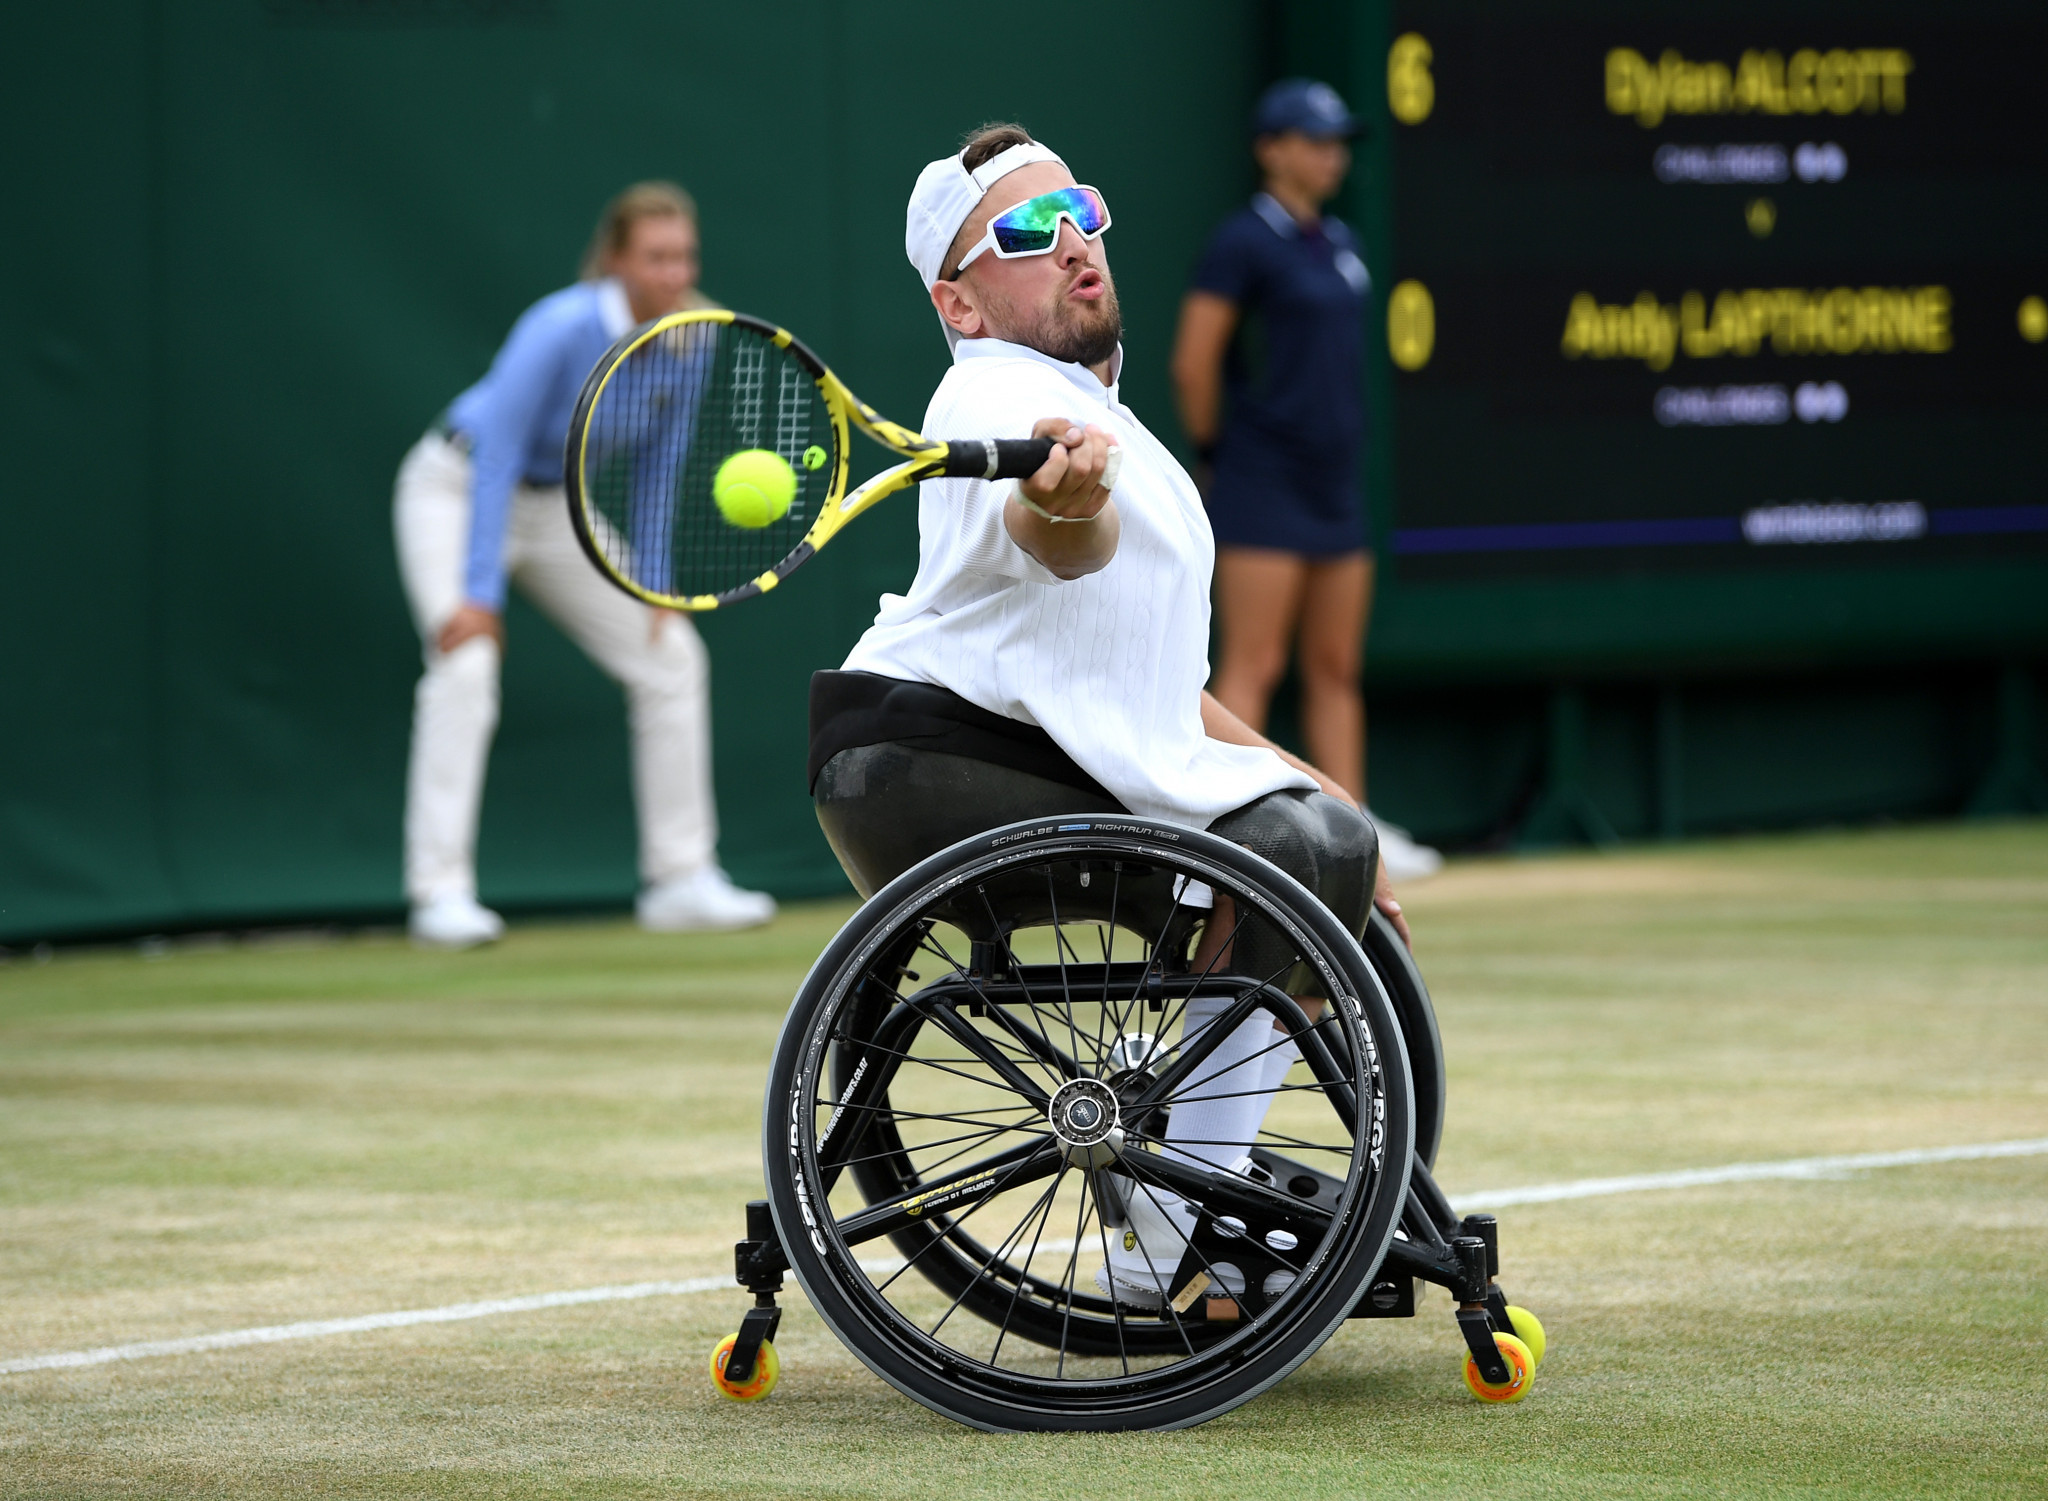 Dylan Alcott of Australia triumphed in the first quad wheelchair singles final at Wimbledon ©Getty Images